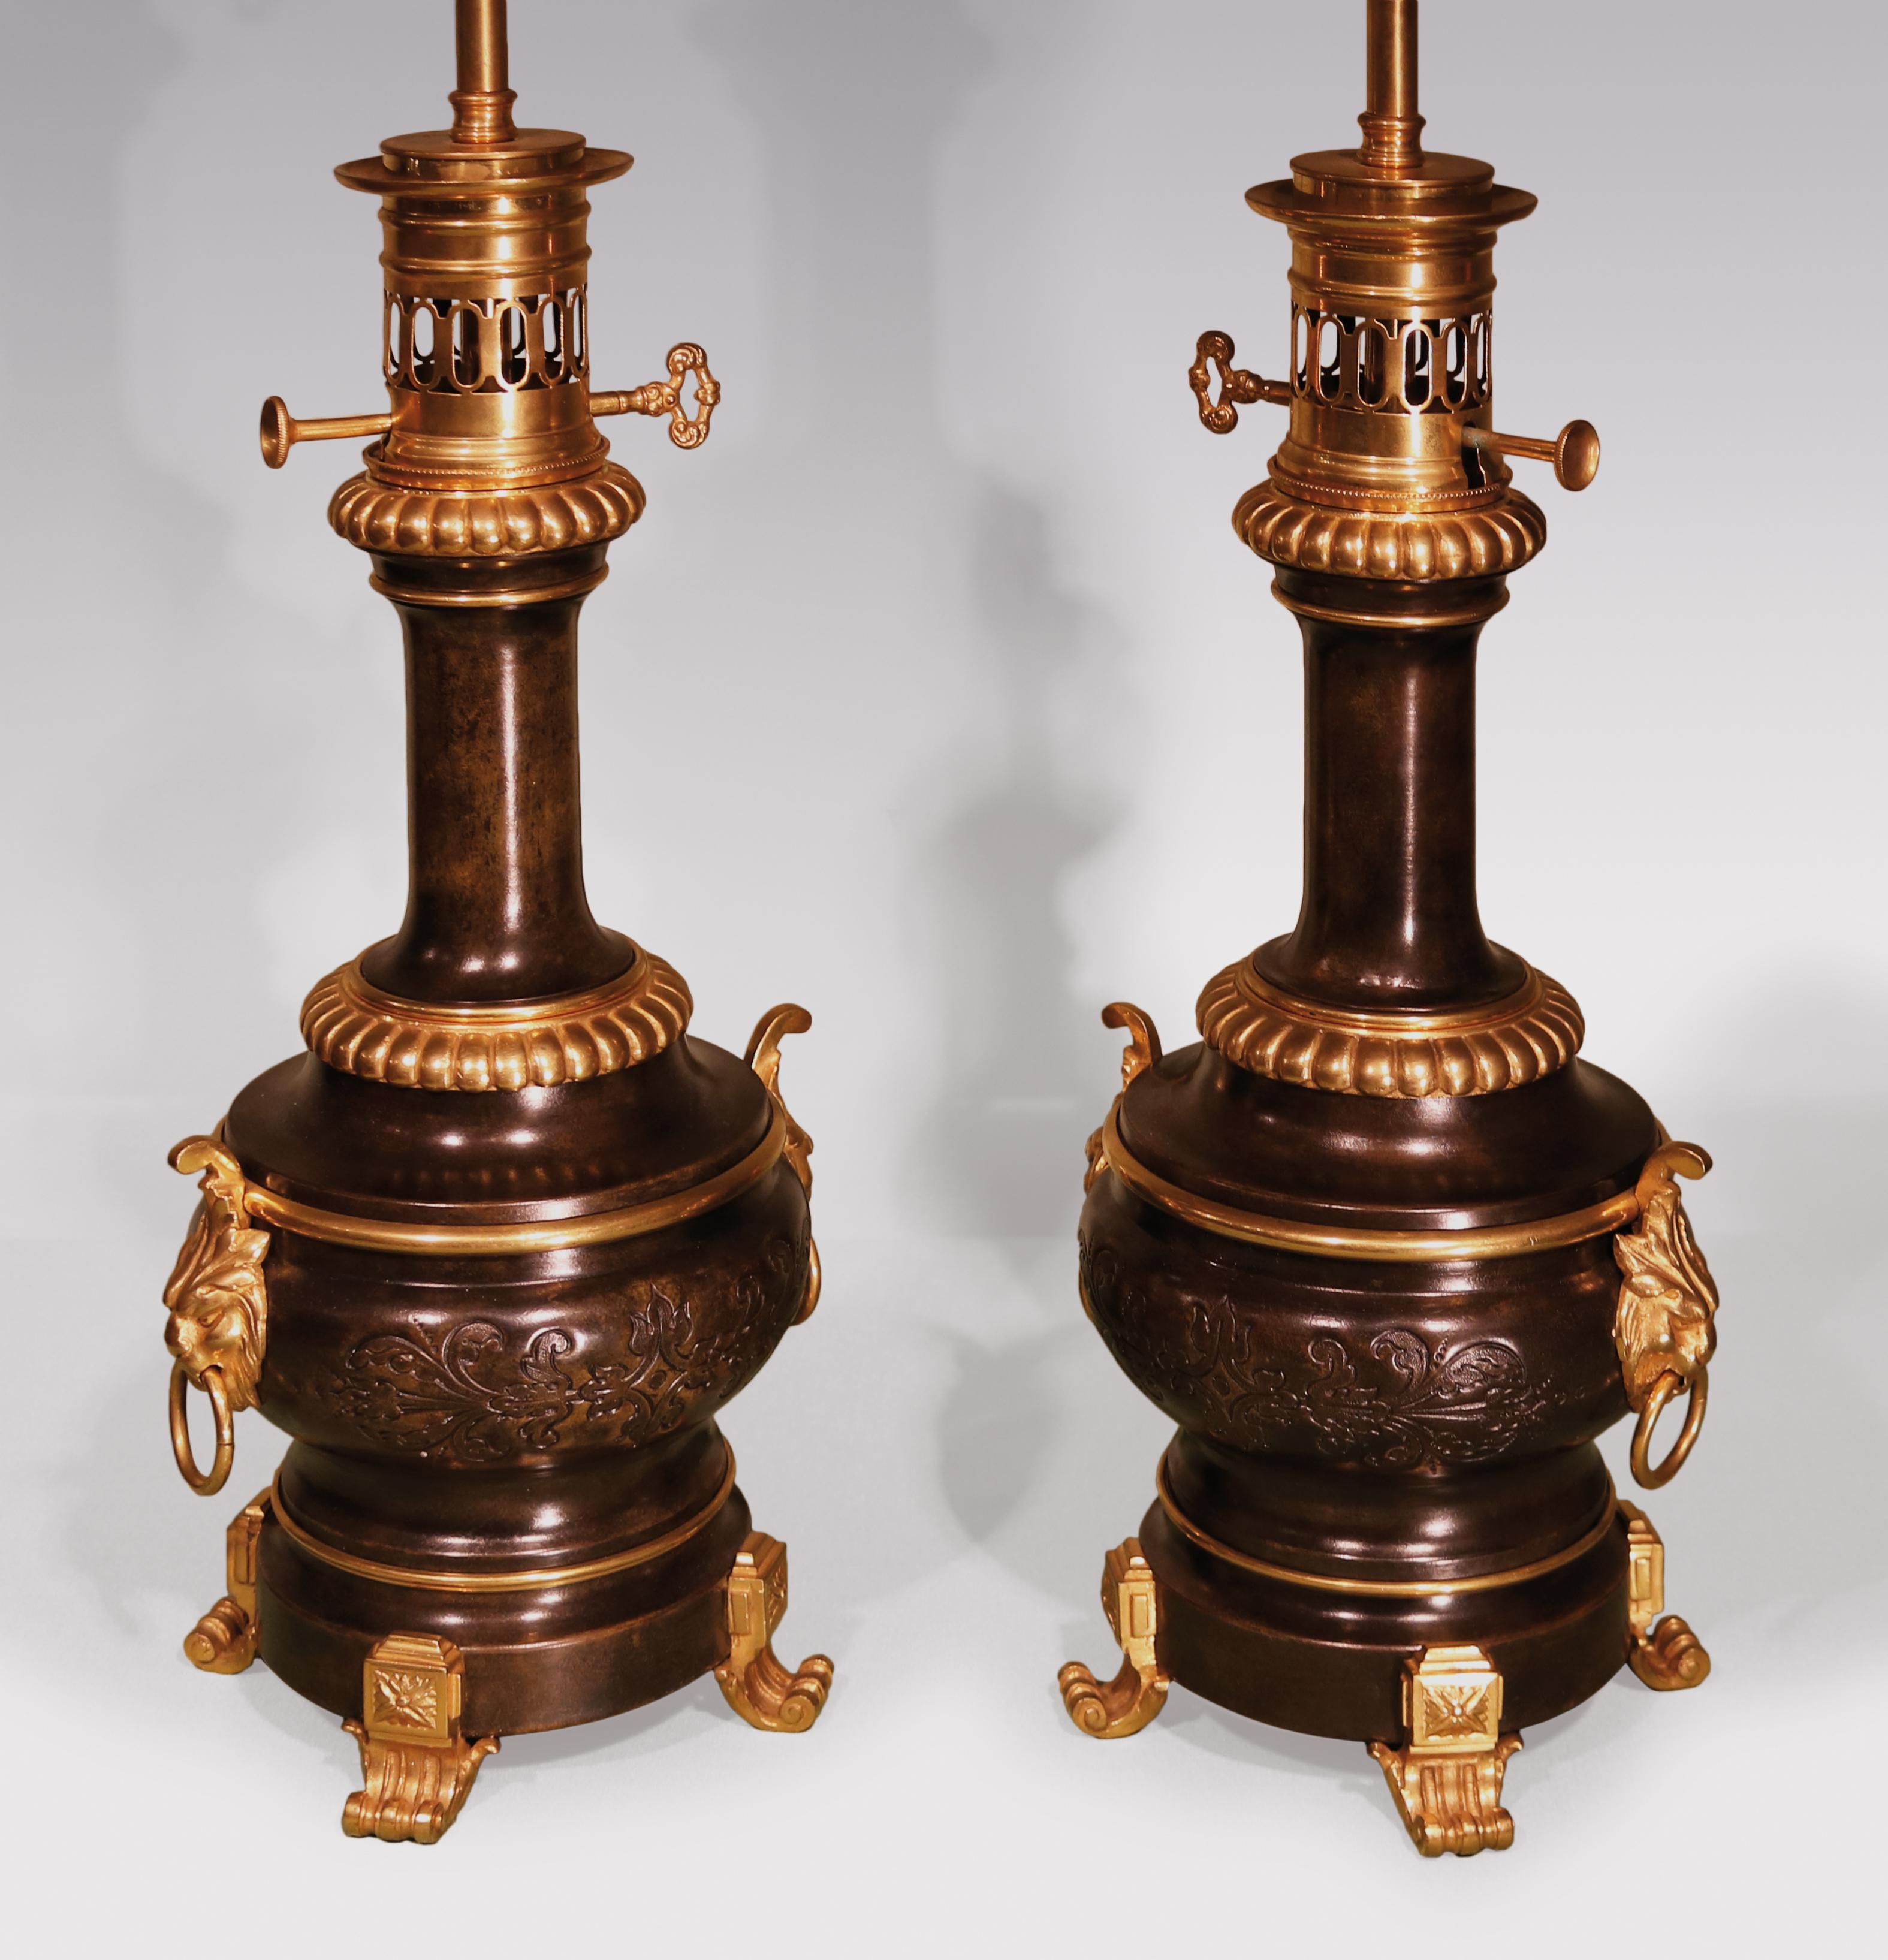 A pair of 19th century bronze & ormolu French Moderateur oil lamps in the form of bulbous vases, with embossed leaf decoration and satyr mask handles, supported on scrolled feet.

(Now converted to electricity).